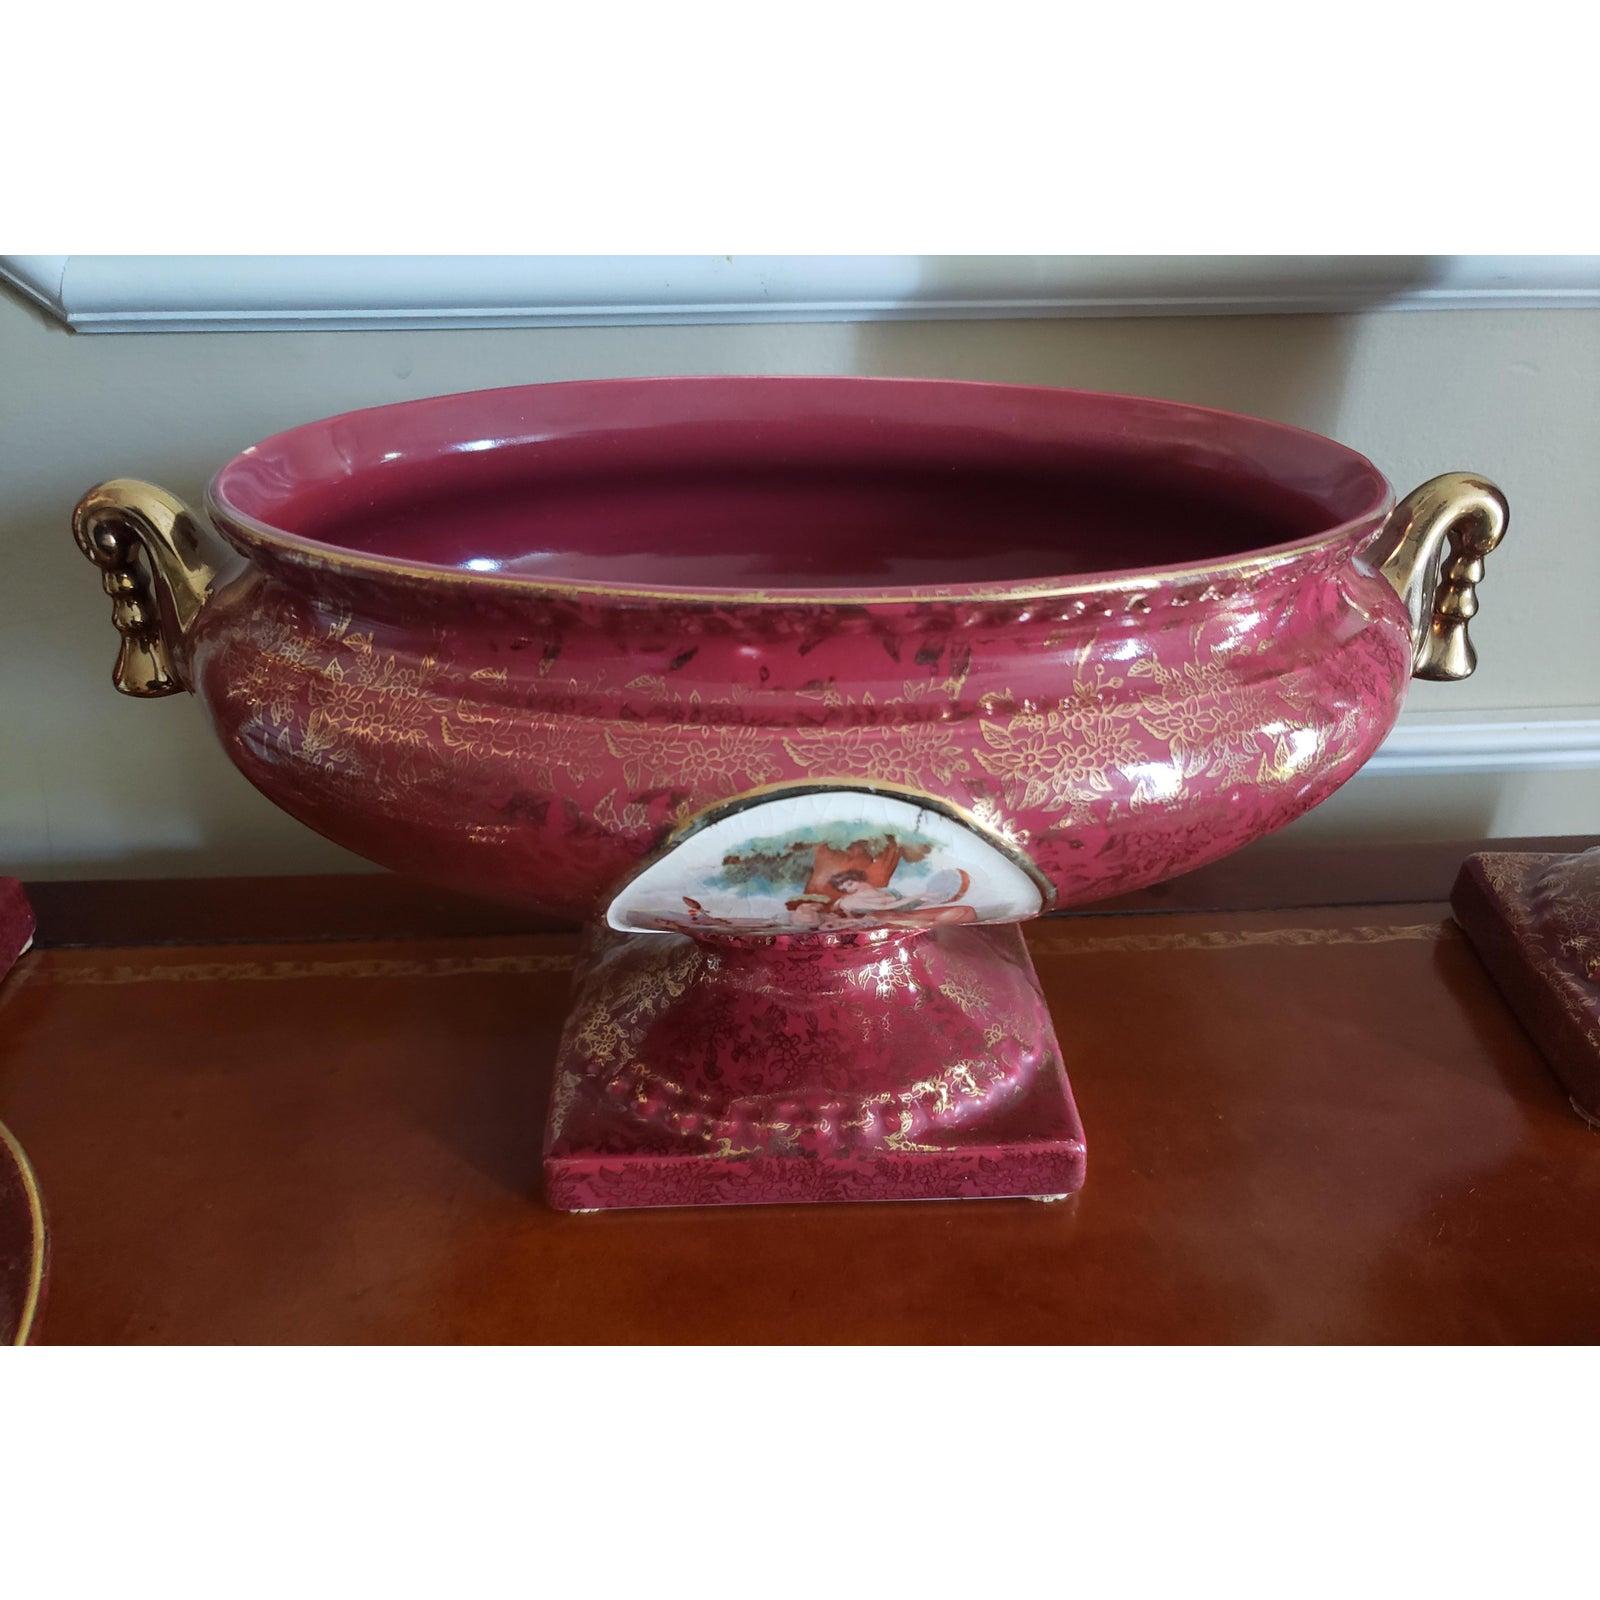 Antique 1930s English Empire Ware Urns Set, 5 Piece Set In Good Condition For Sale In Germantown, MD